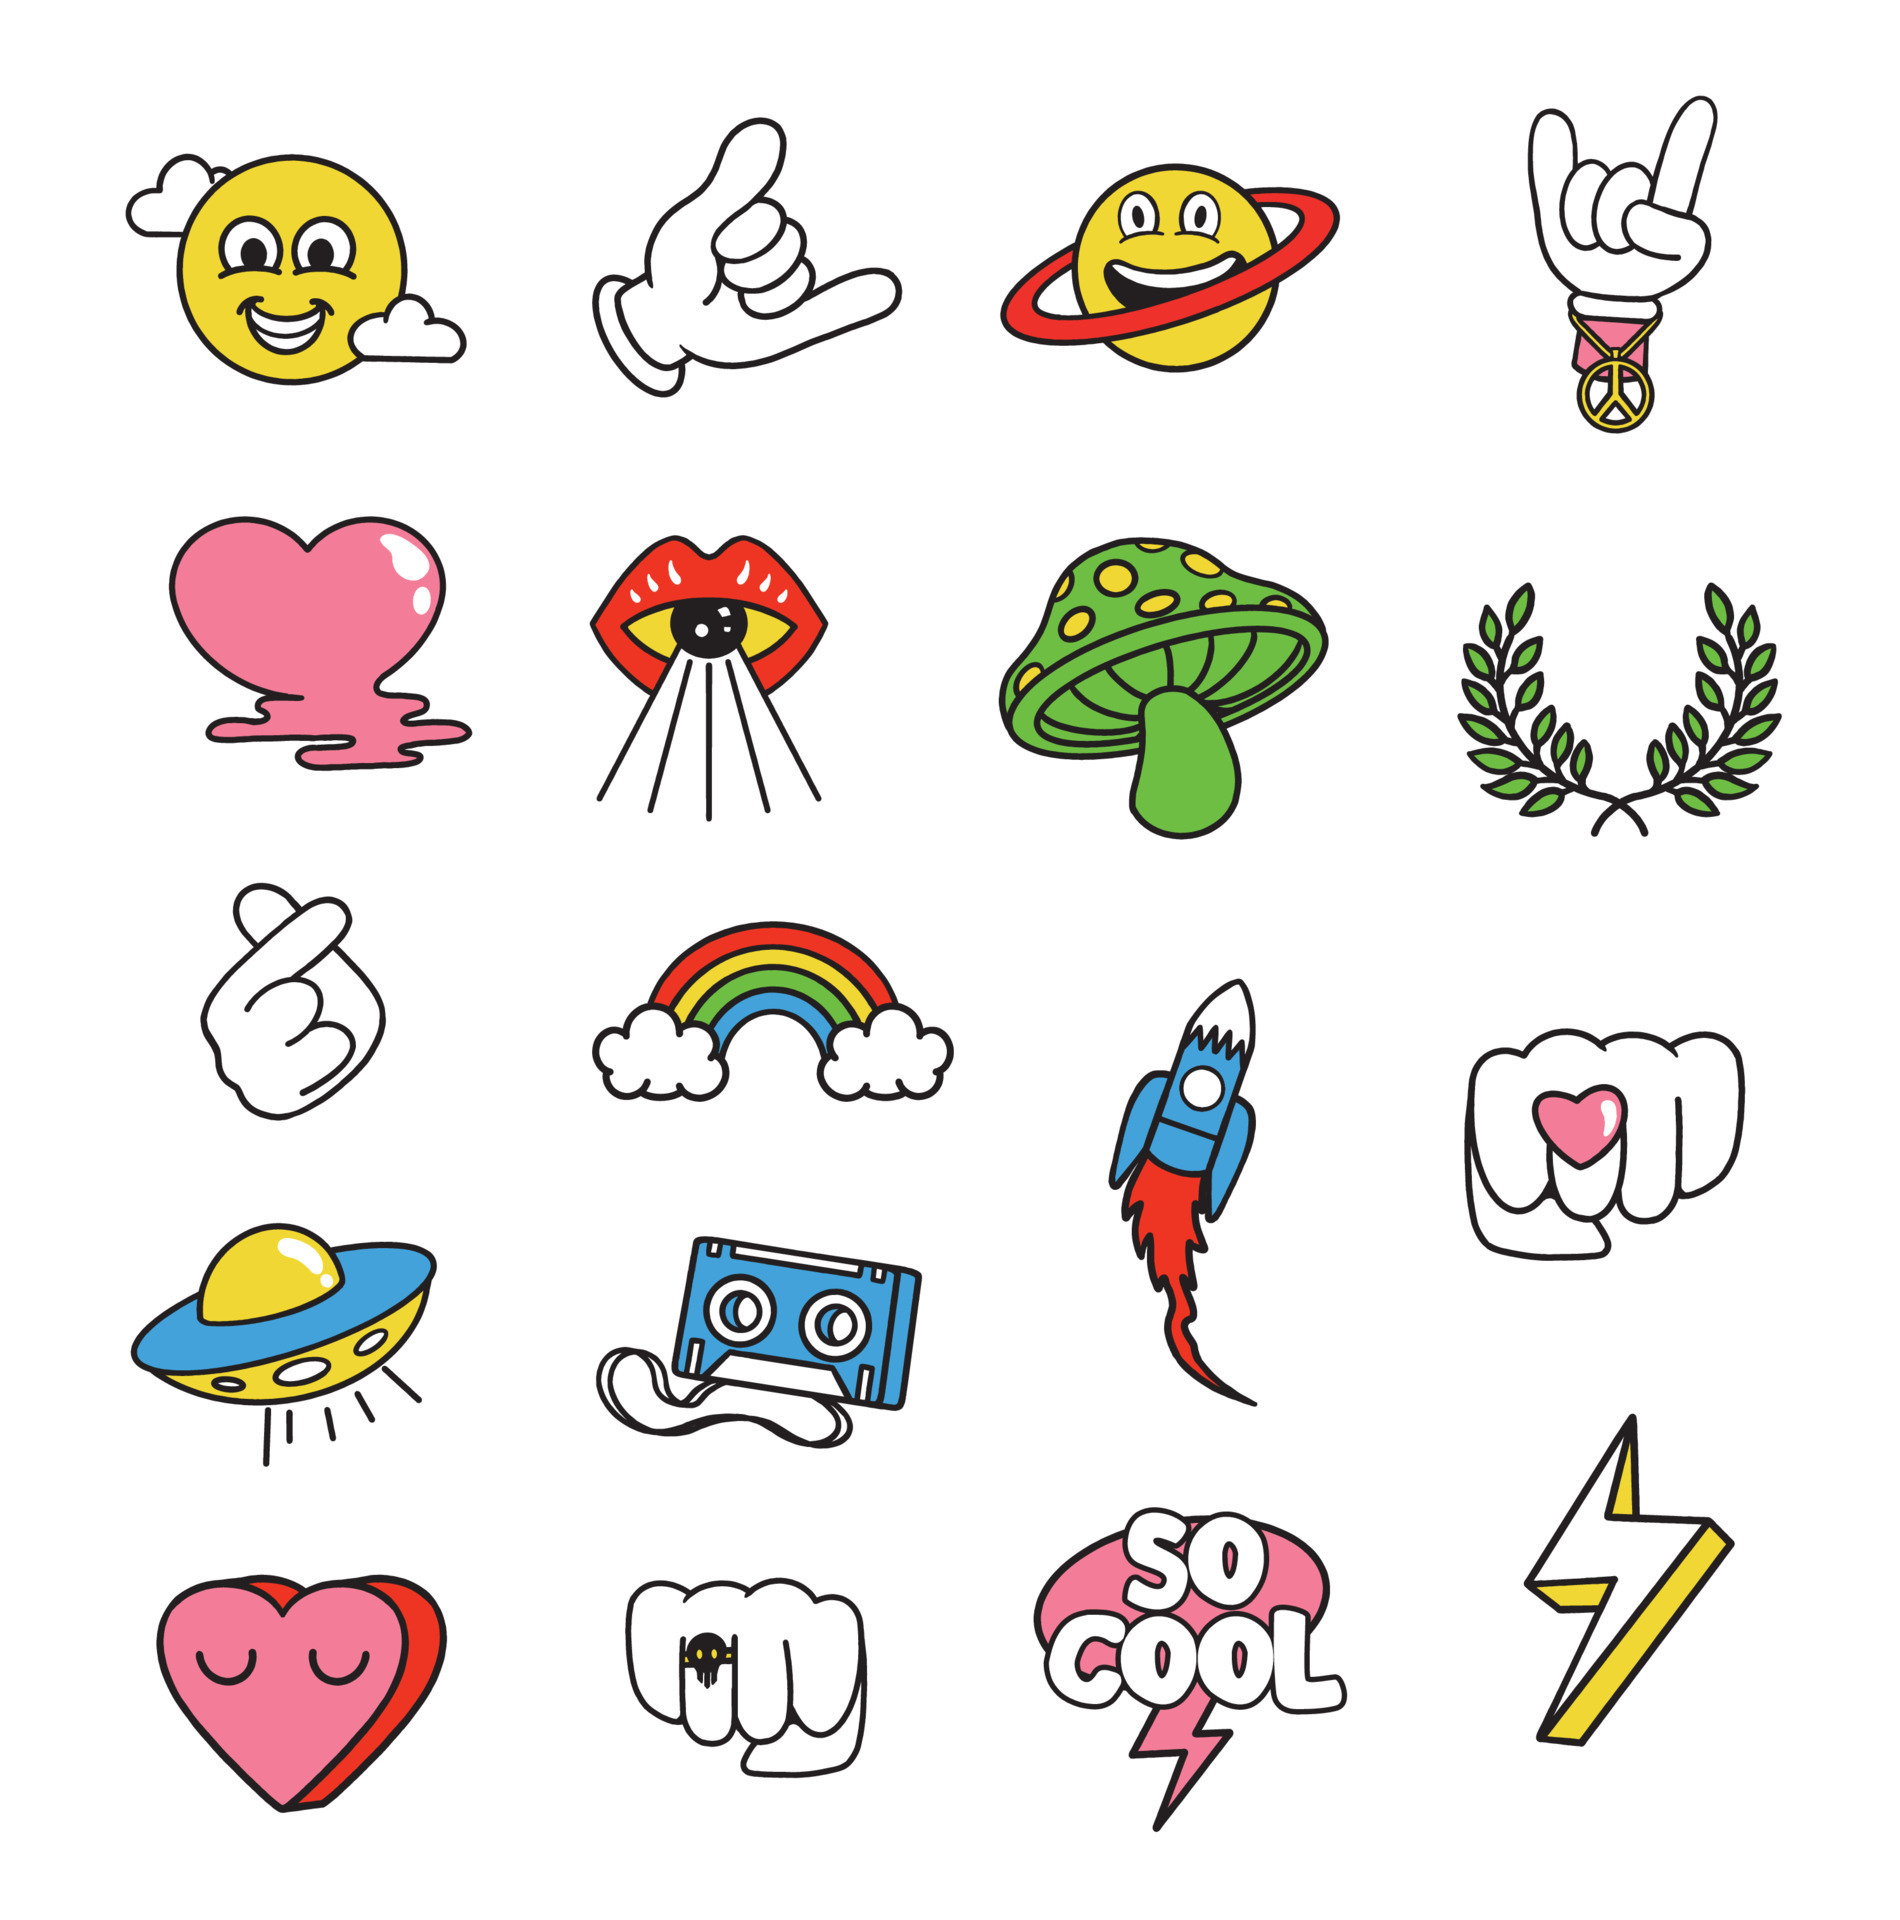 Cute sticker set collections Royalty Free Vector Image